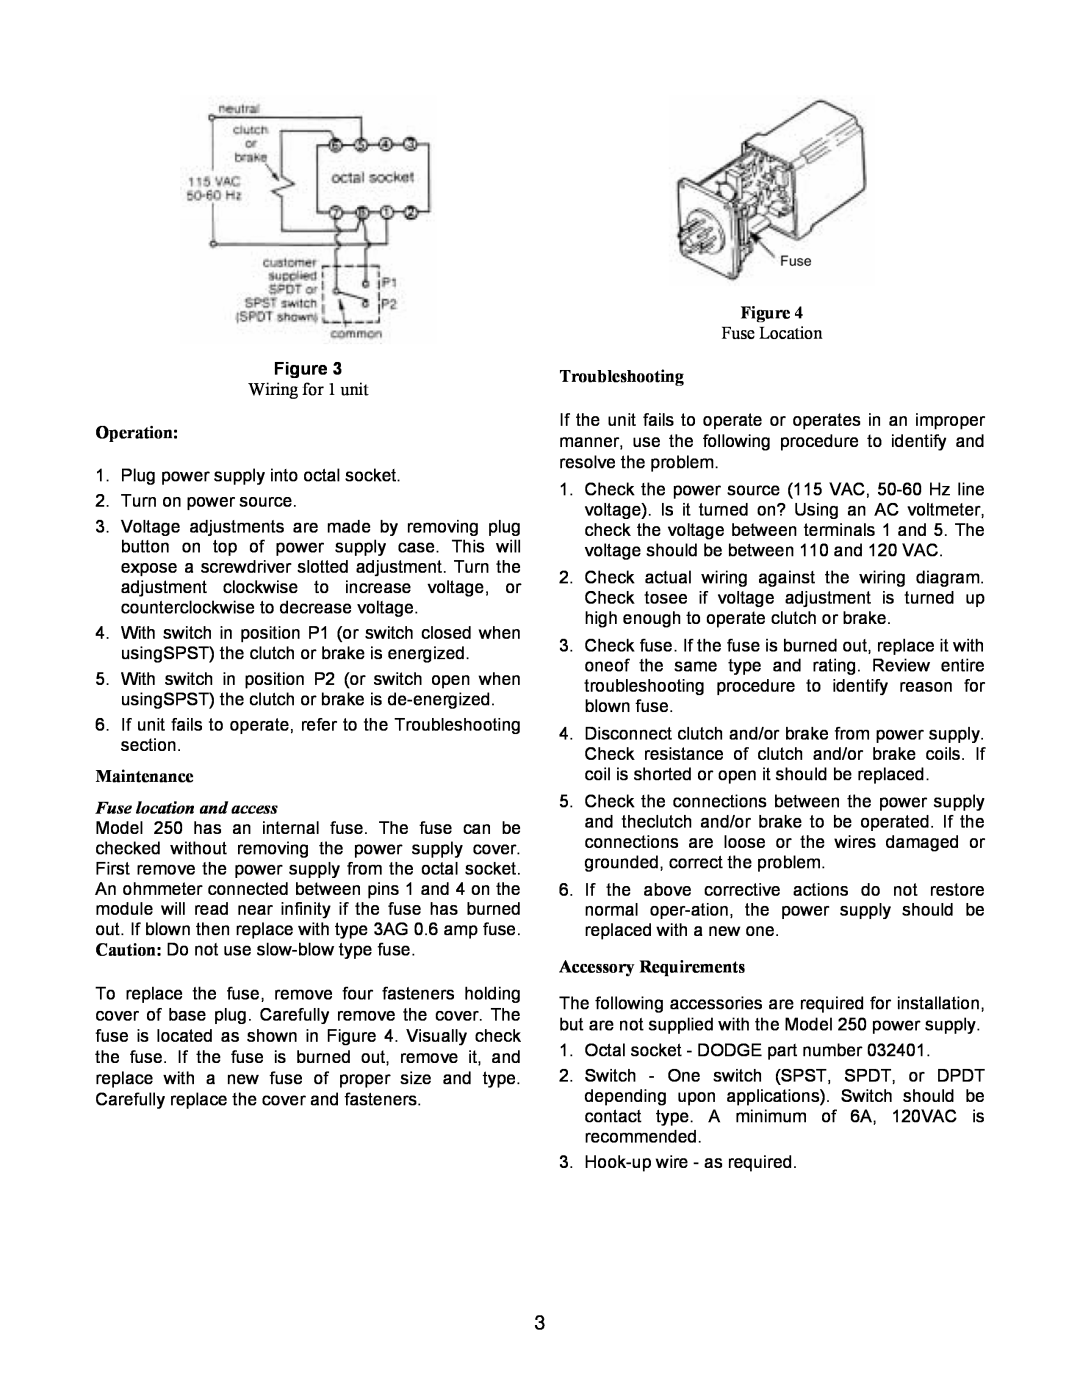 Dodge 250 installation manual Wiring for 1 unit, Fuse location and access, Fuse Location 